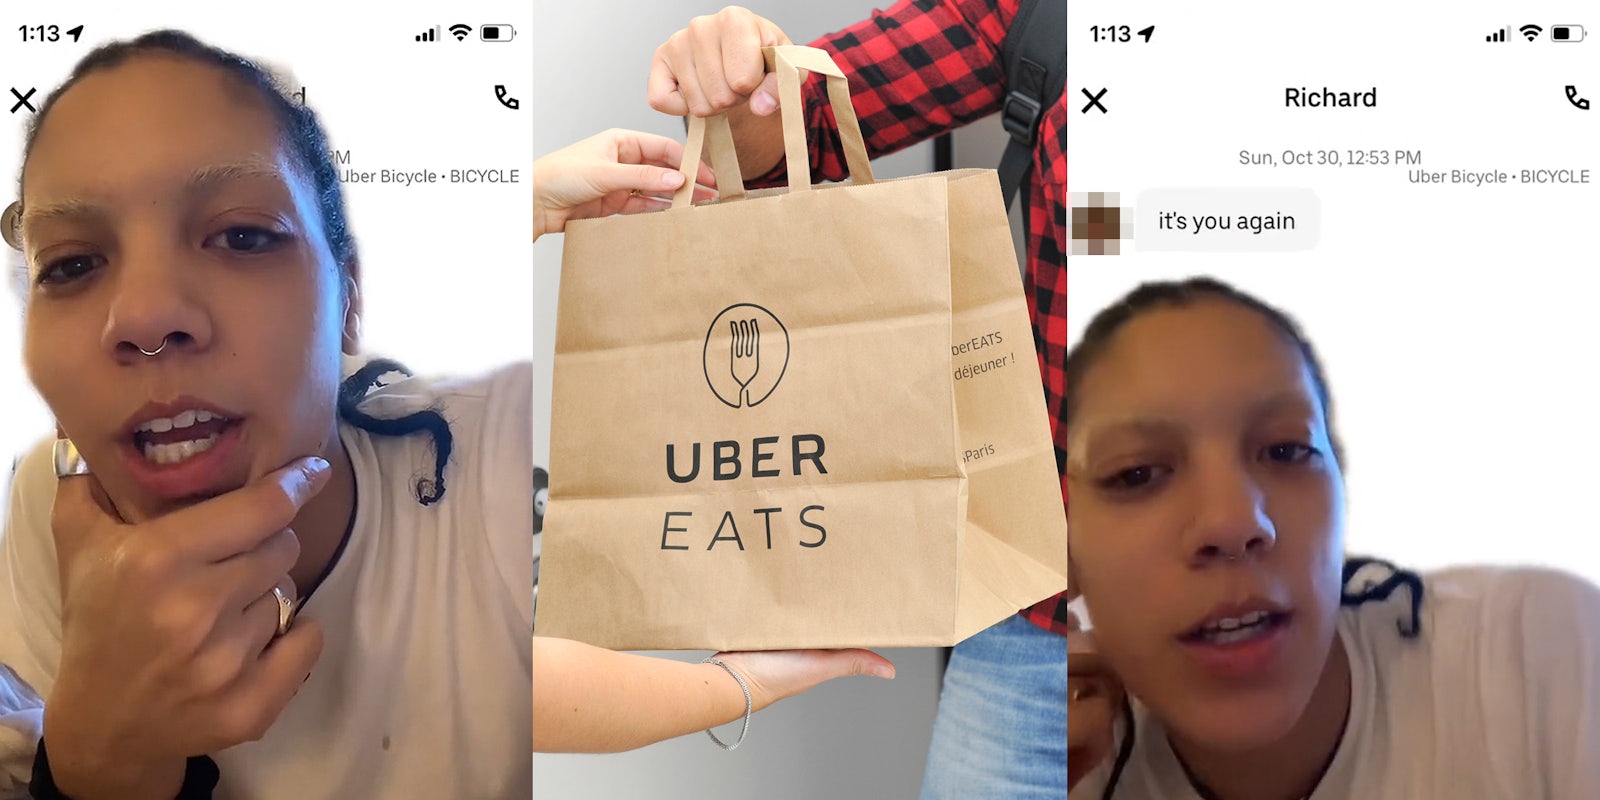 woman greenscreen TikTok over Uber Eats chat (l) Uber Eats paper bag being passed from one person to another (c) woman greenscreen TikTok over Uber Eats chat 'it's you again' (r)